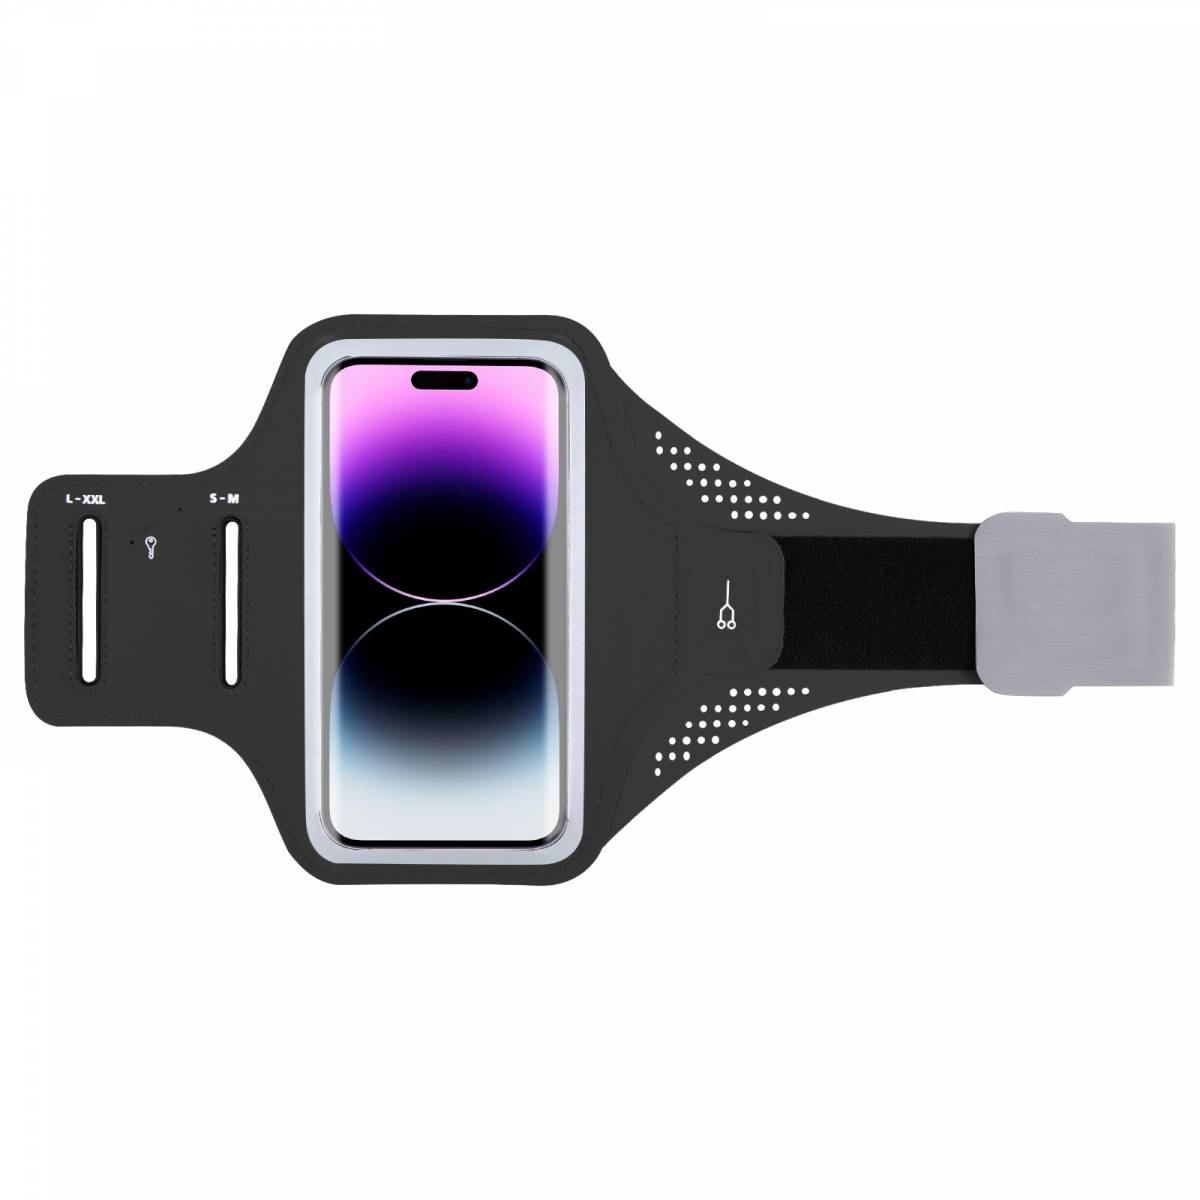 XXL sports running bracelet for iPhone/smartphone up to 7